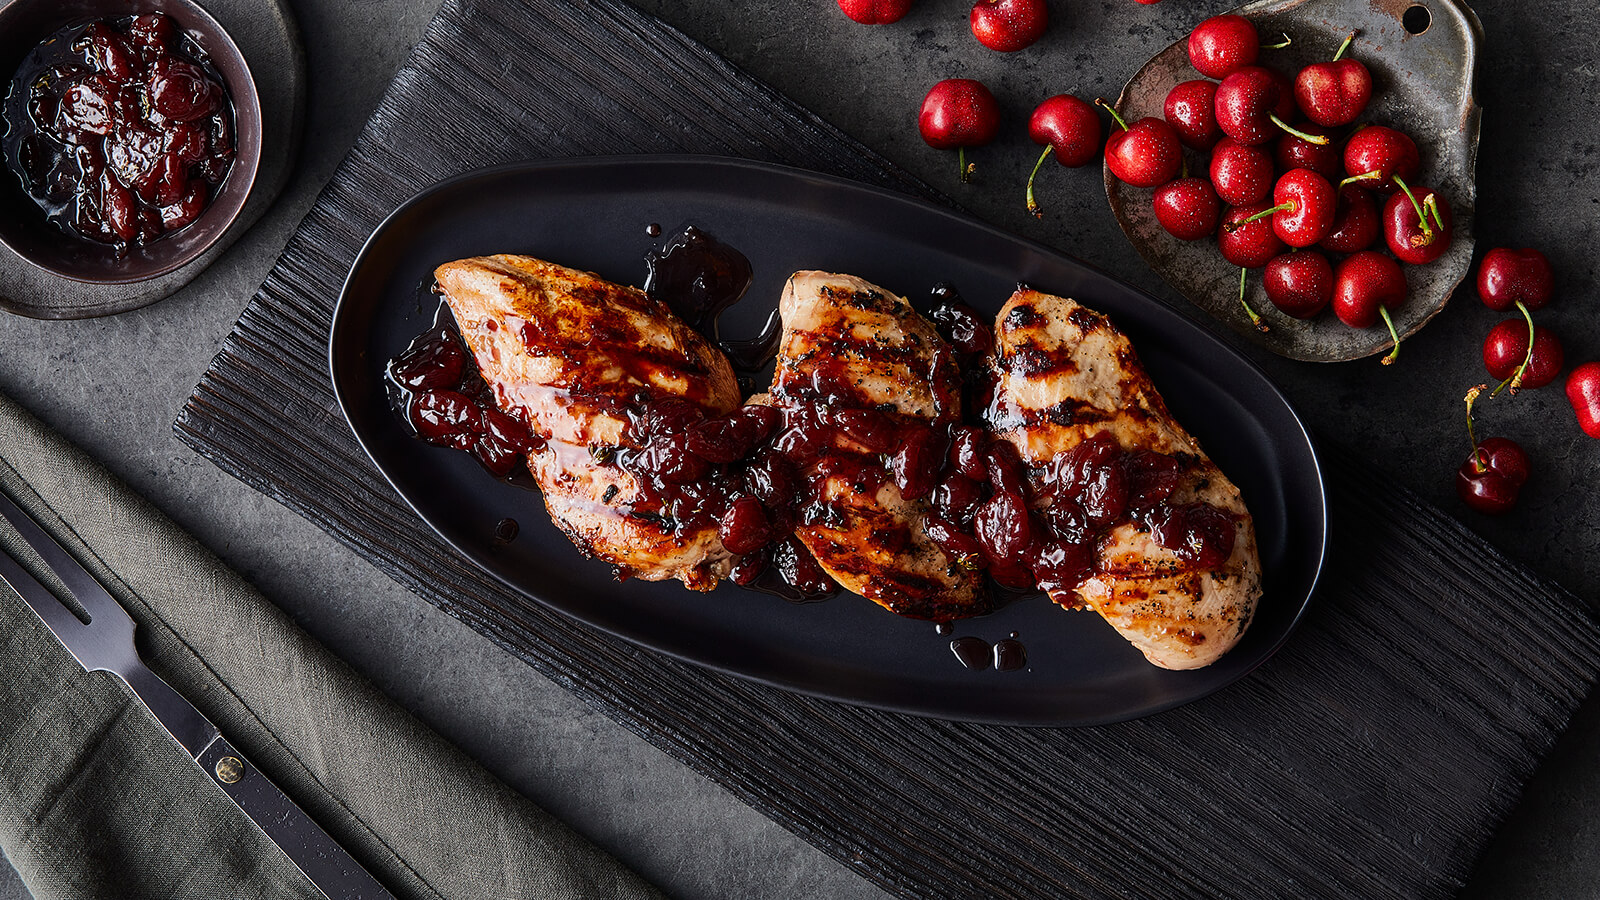 Pomegranate Grilled Chicken with Cherry Thyme Chutney